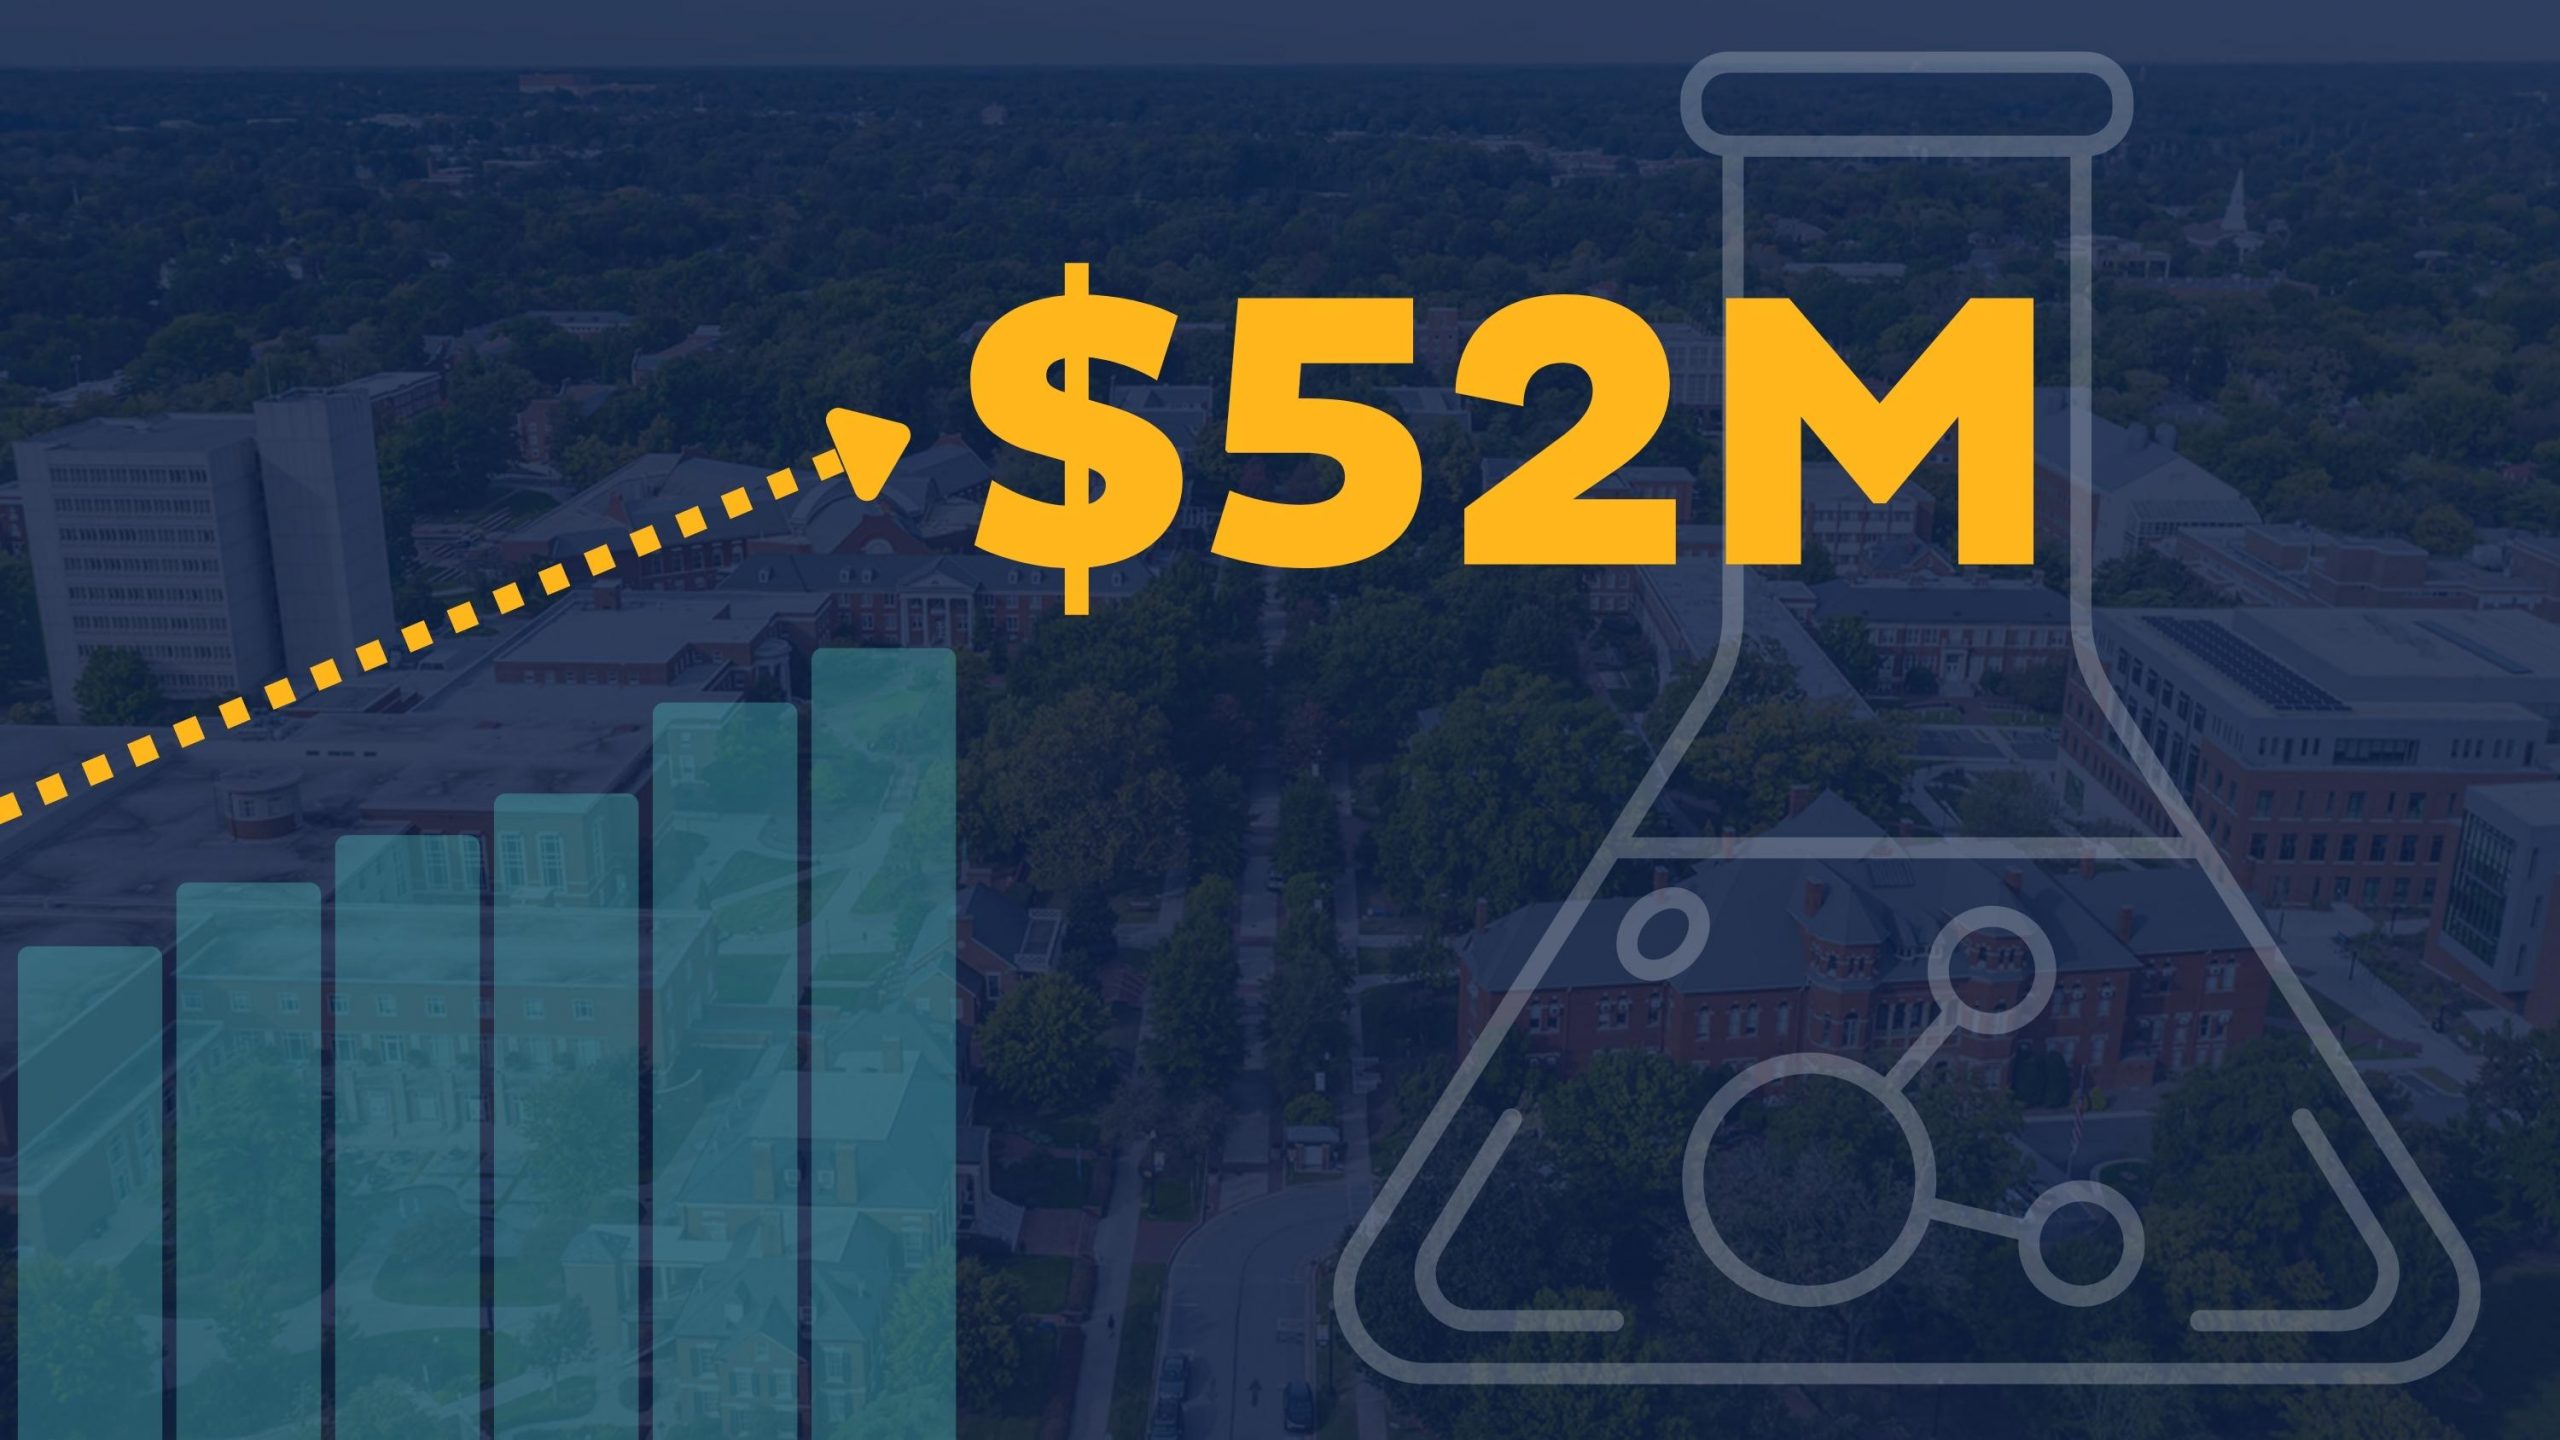 Featured Image for Research awards climb to $52M, highest in UNCG history